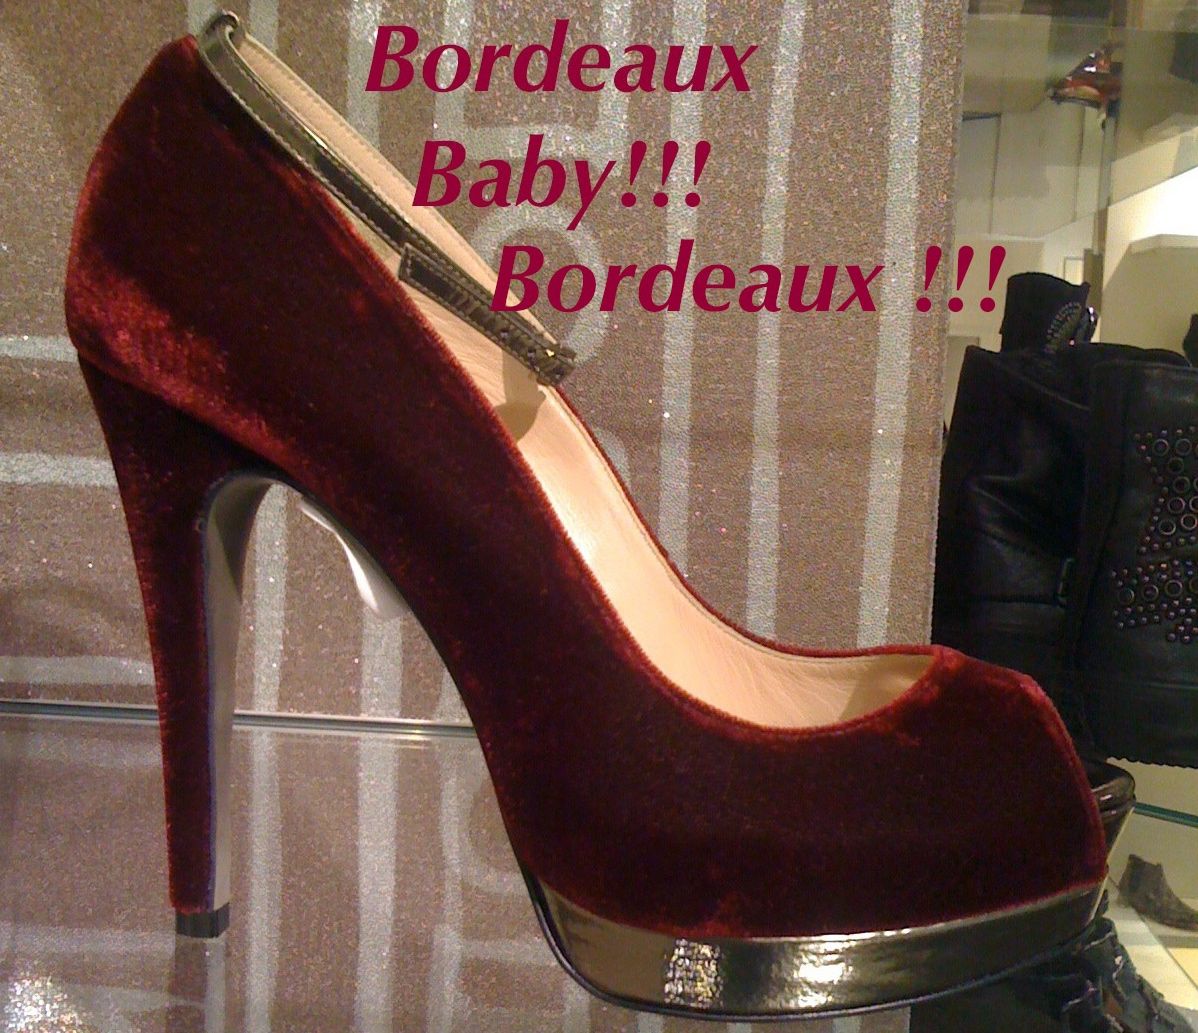 <!--:en-->Bordeaux!!!! The Color that works for Fall Winter 2012<!--:-->